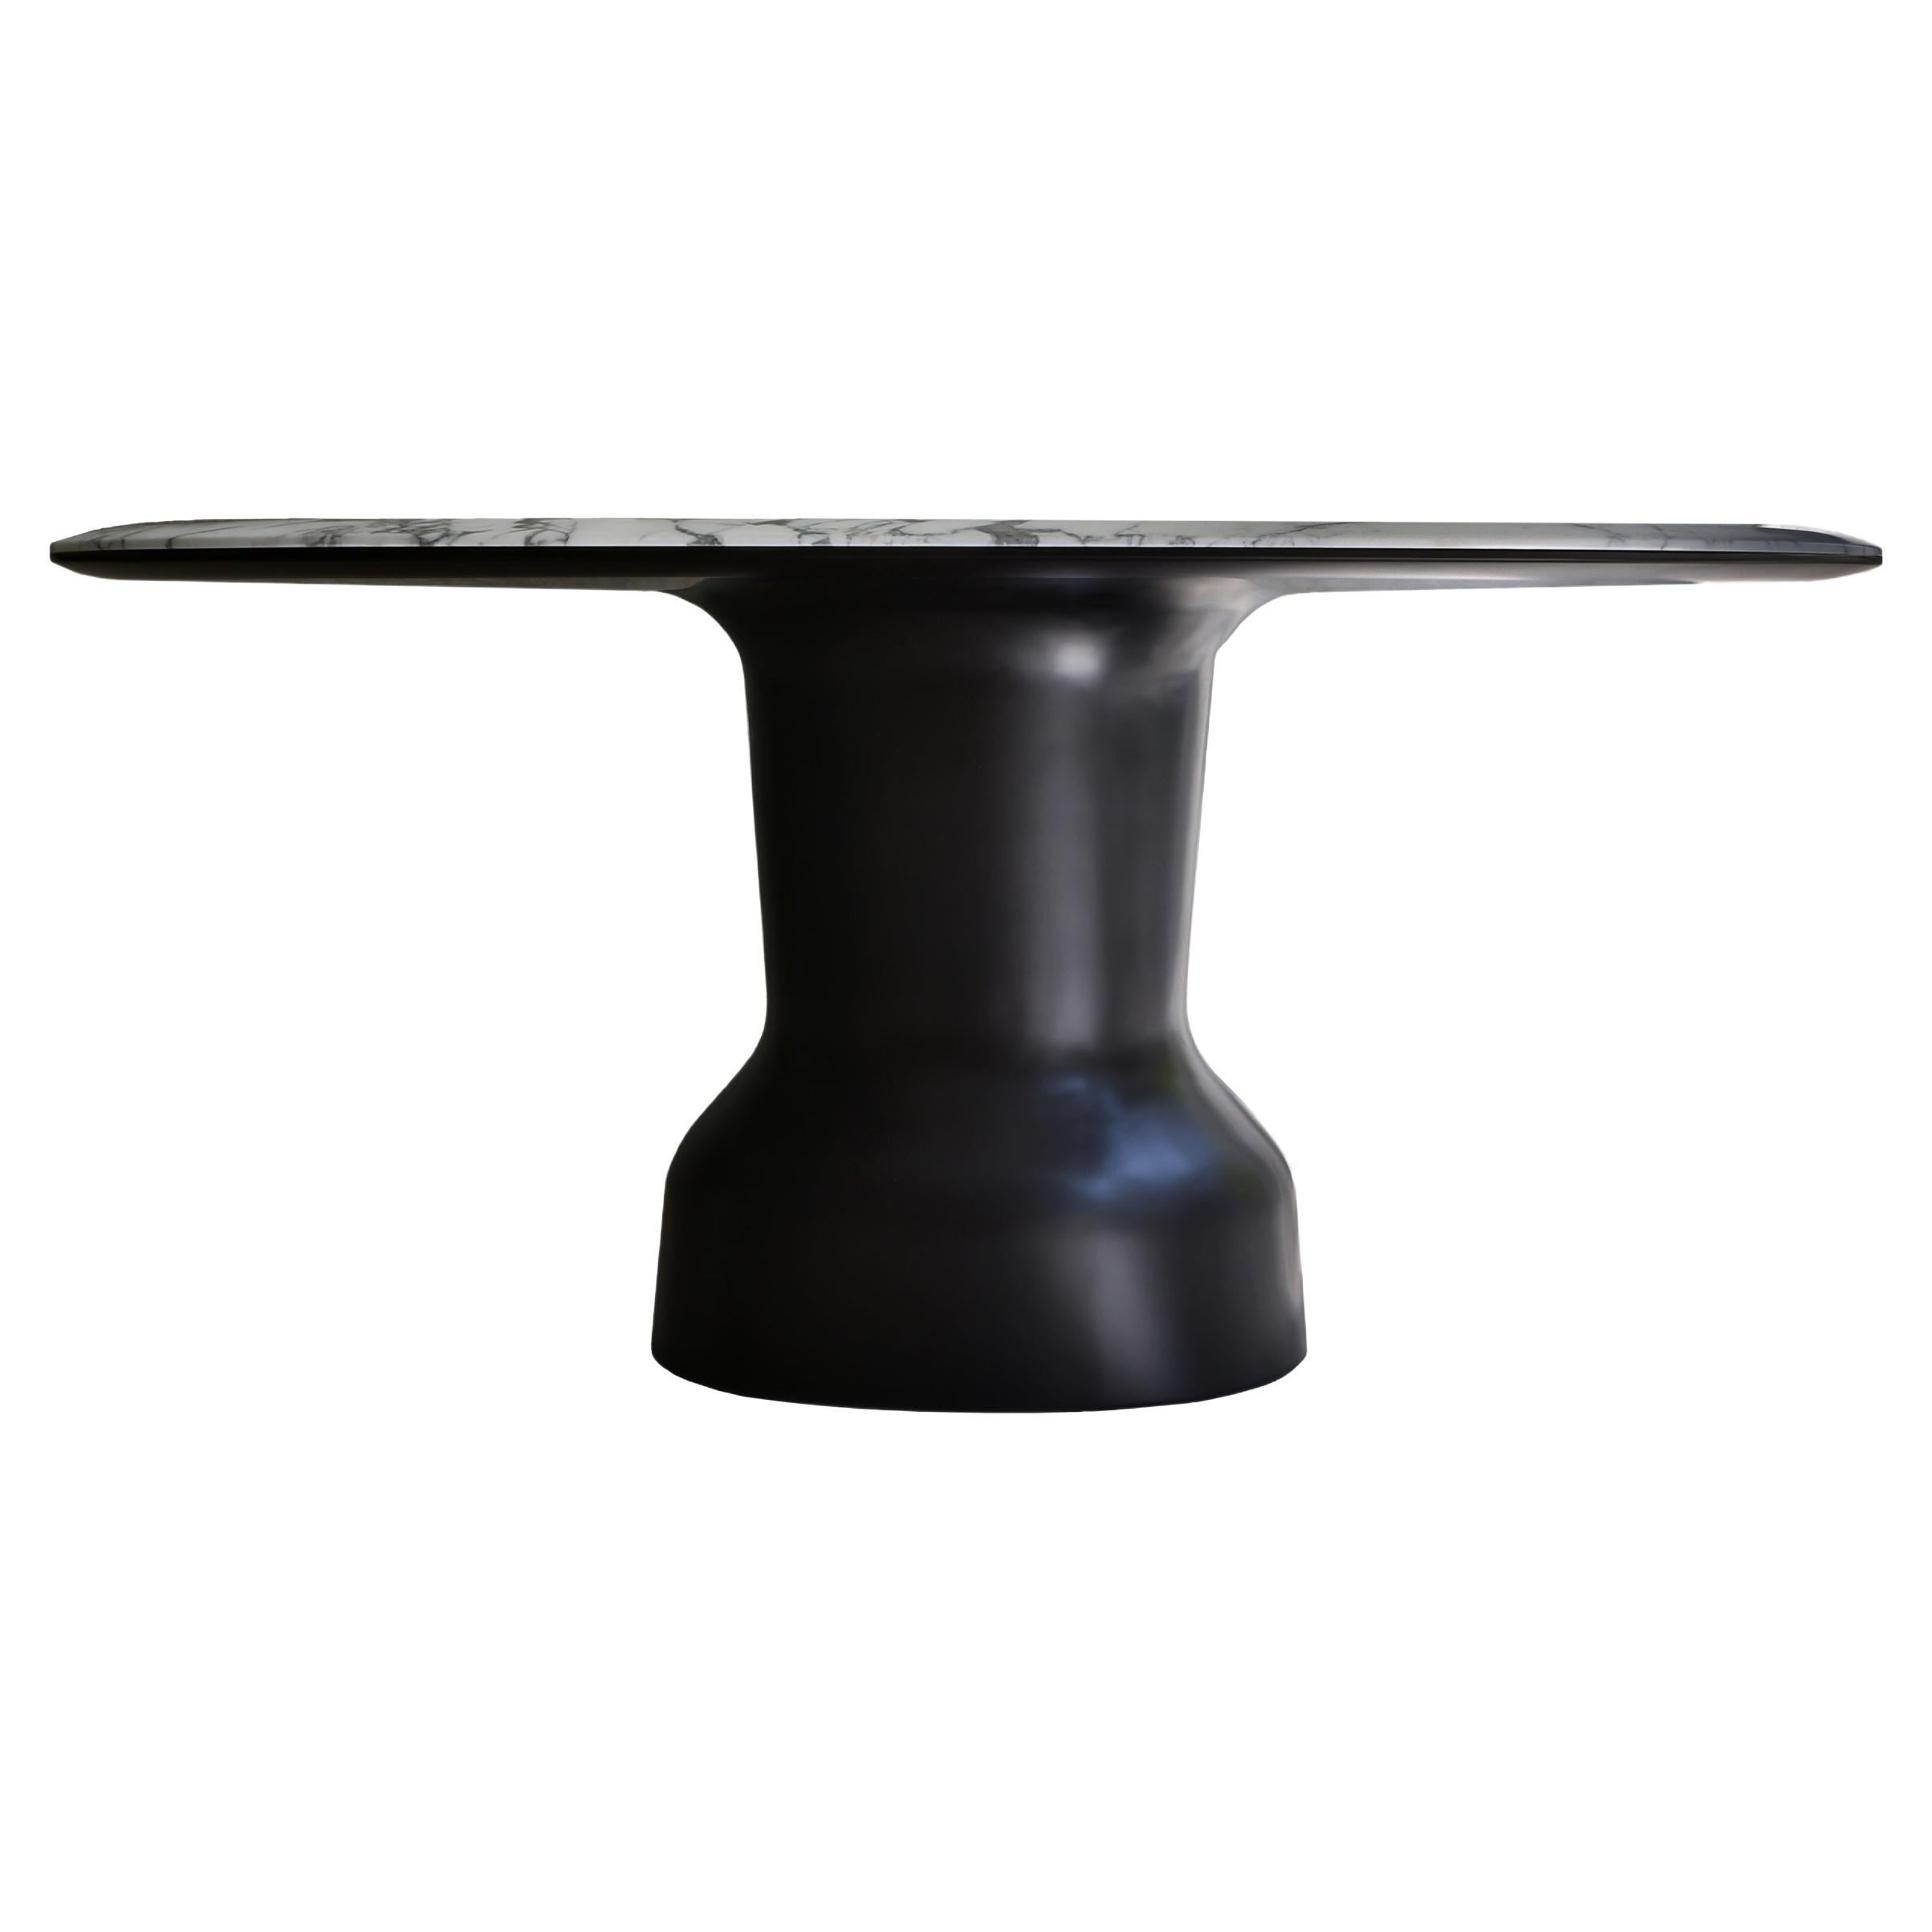 Musa, a sculptural table with top in marble For Sale